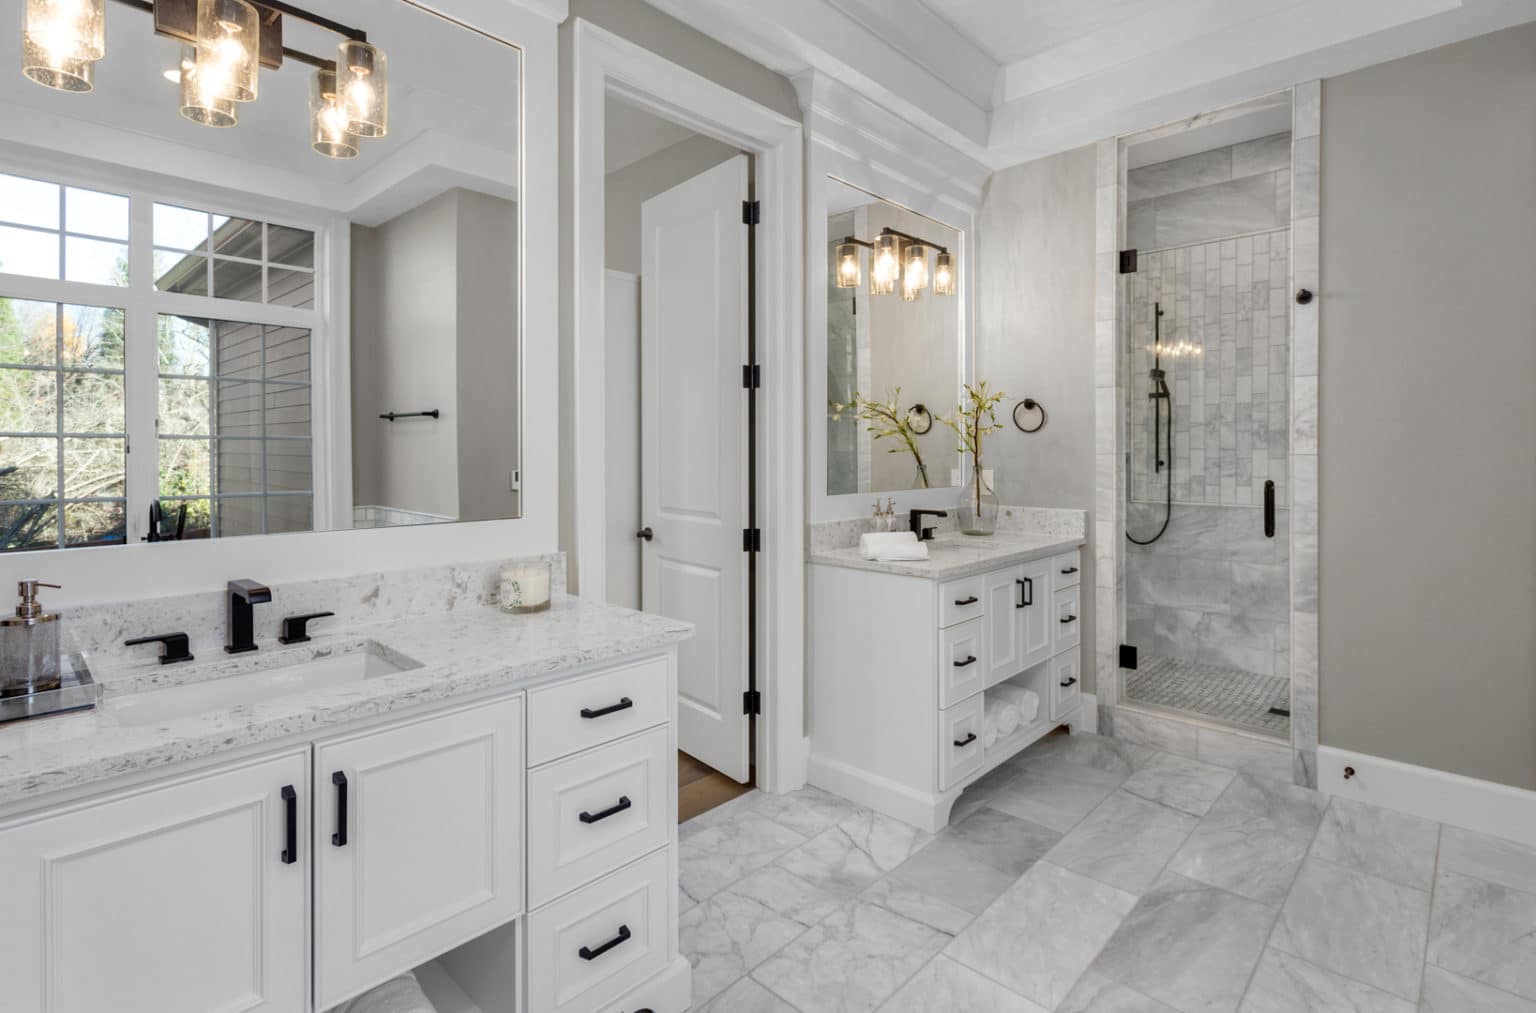 Beautiful bathroom in new luxury home with two vanities, sinks, and mirrors.